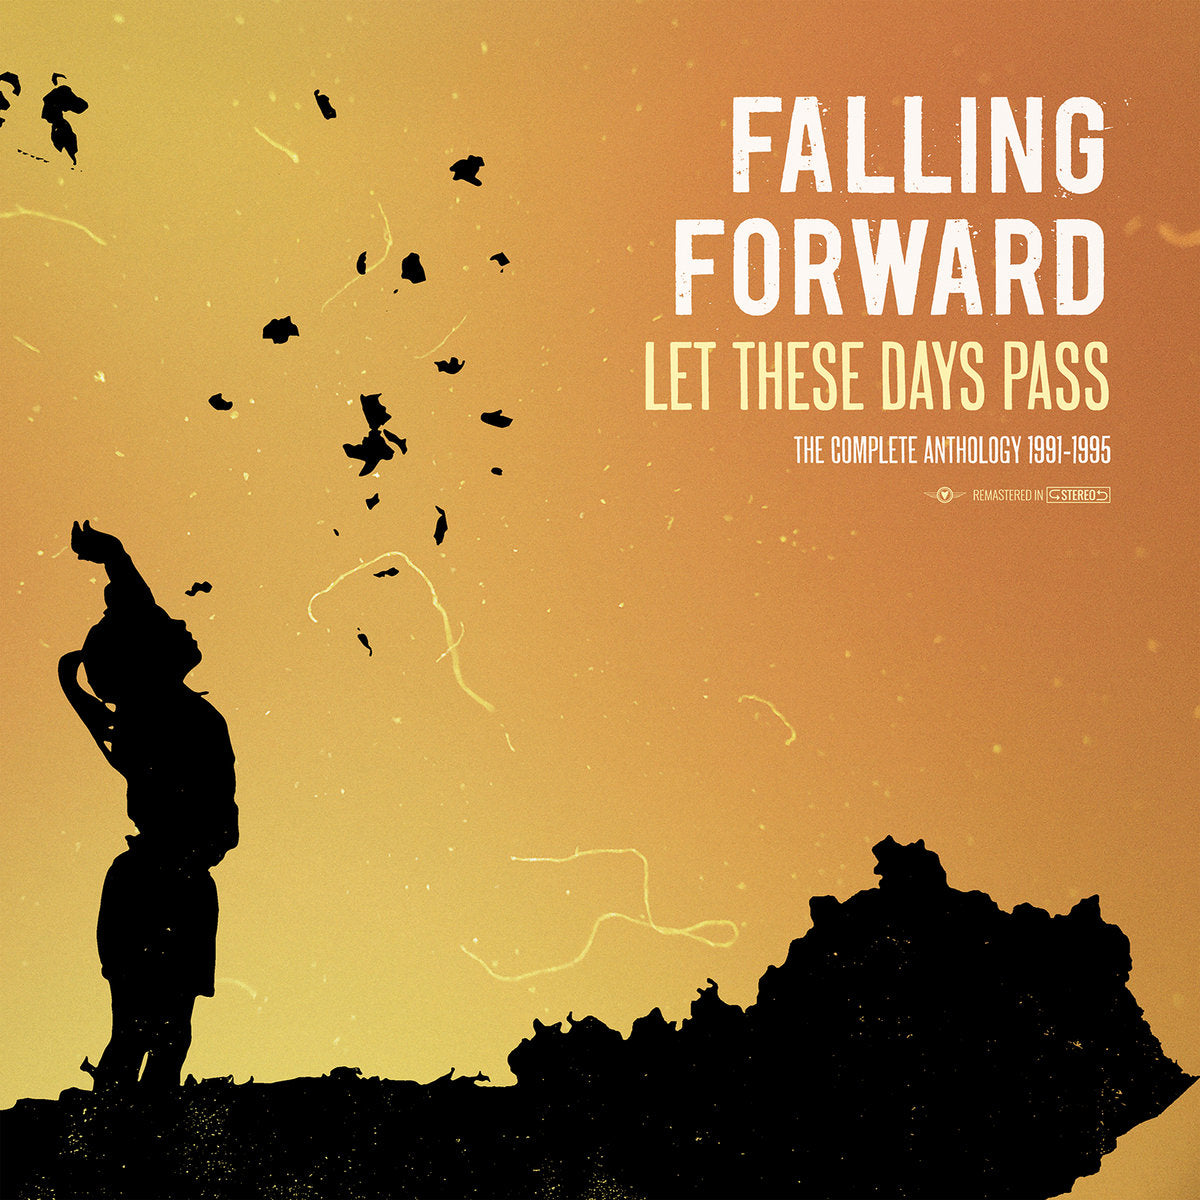 FALLING FORWARD - LET THESE DAYS PASS: THE COMPLETE ANTHOLOGY 1991-1995 Vinyl LP